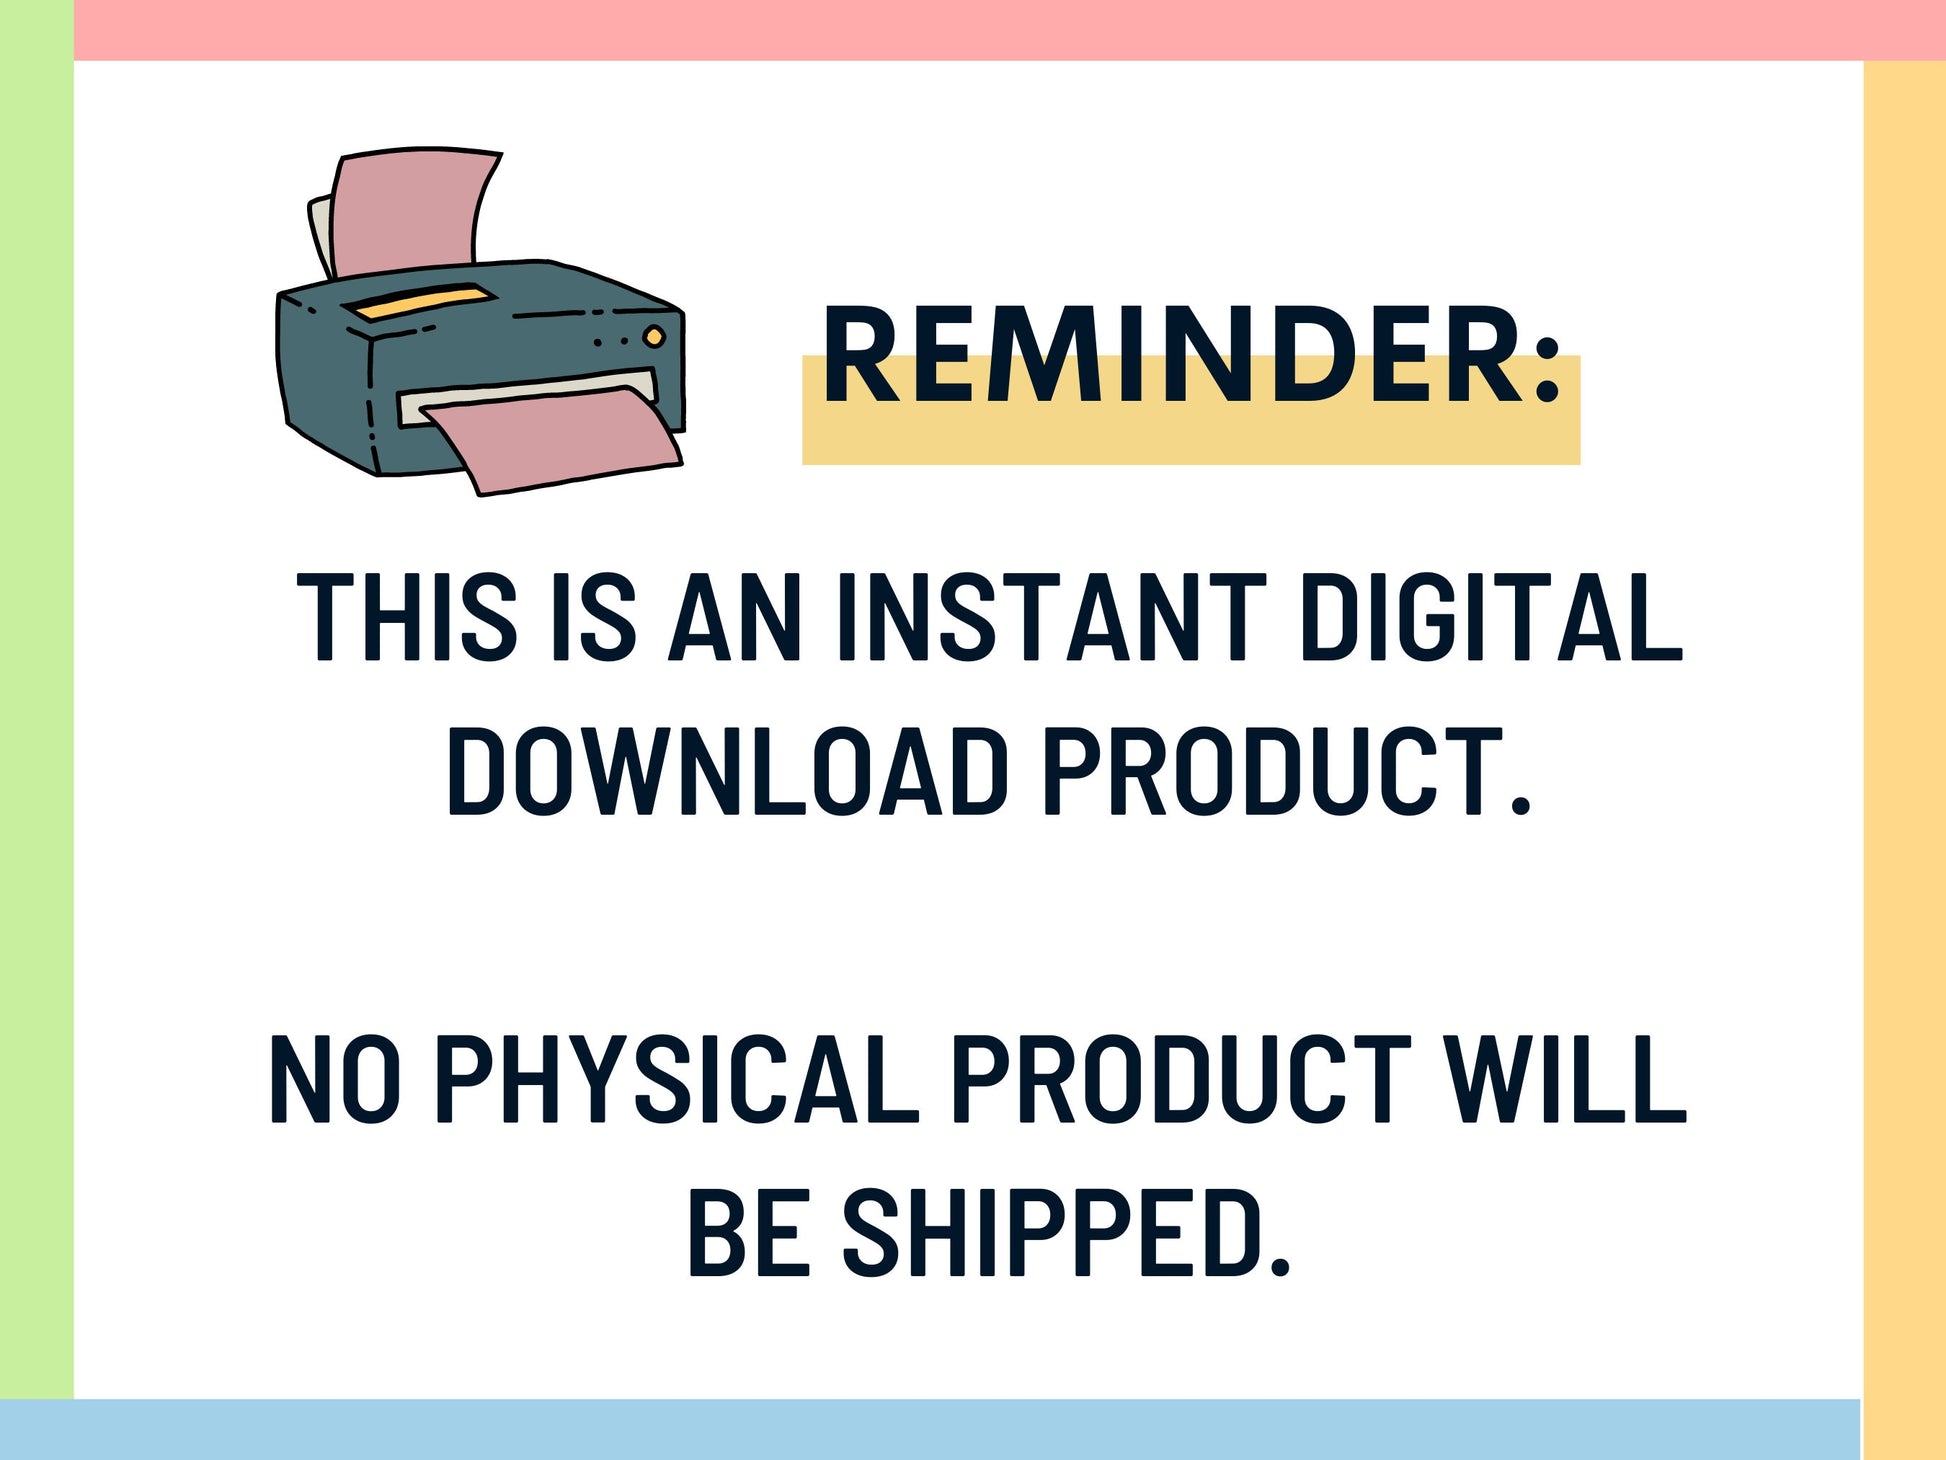 Sign describing how the radical acceptance dbt poster is an instant digital download product